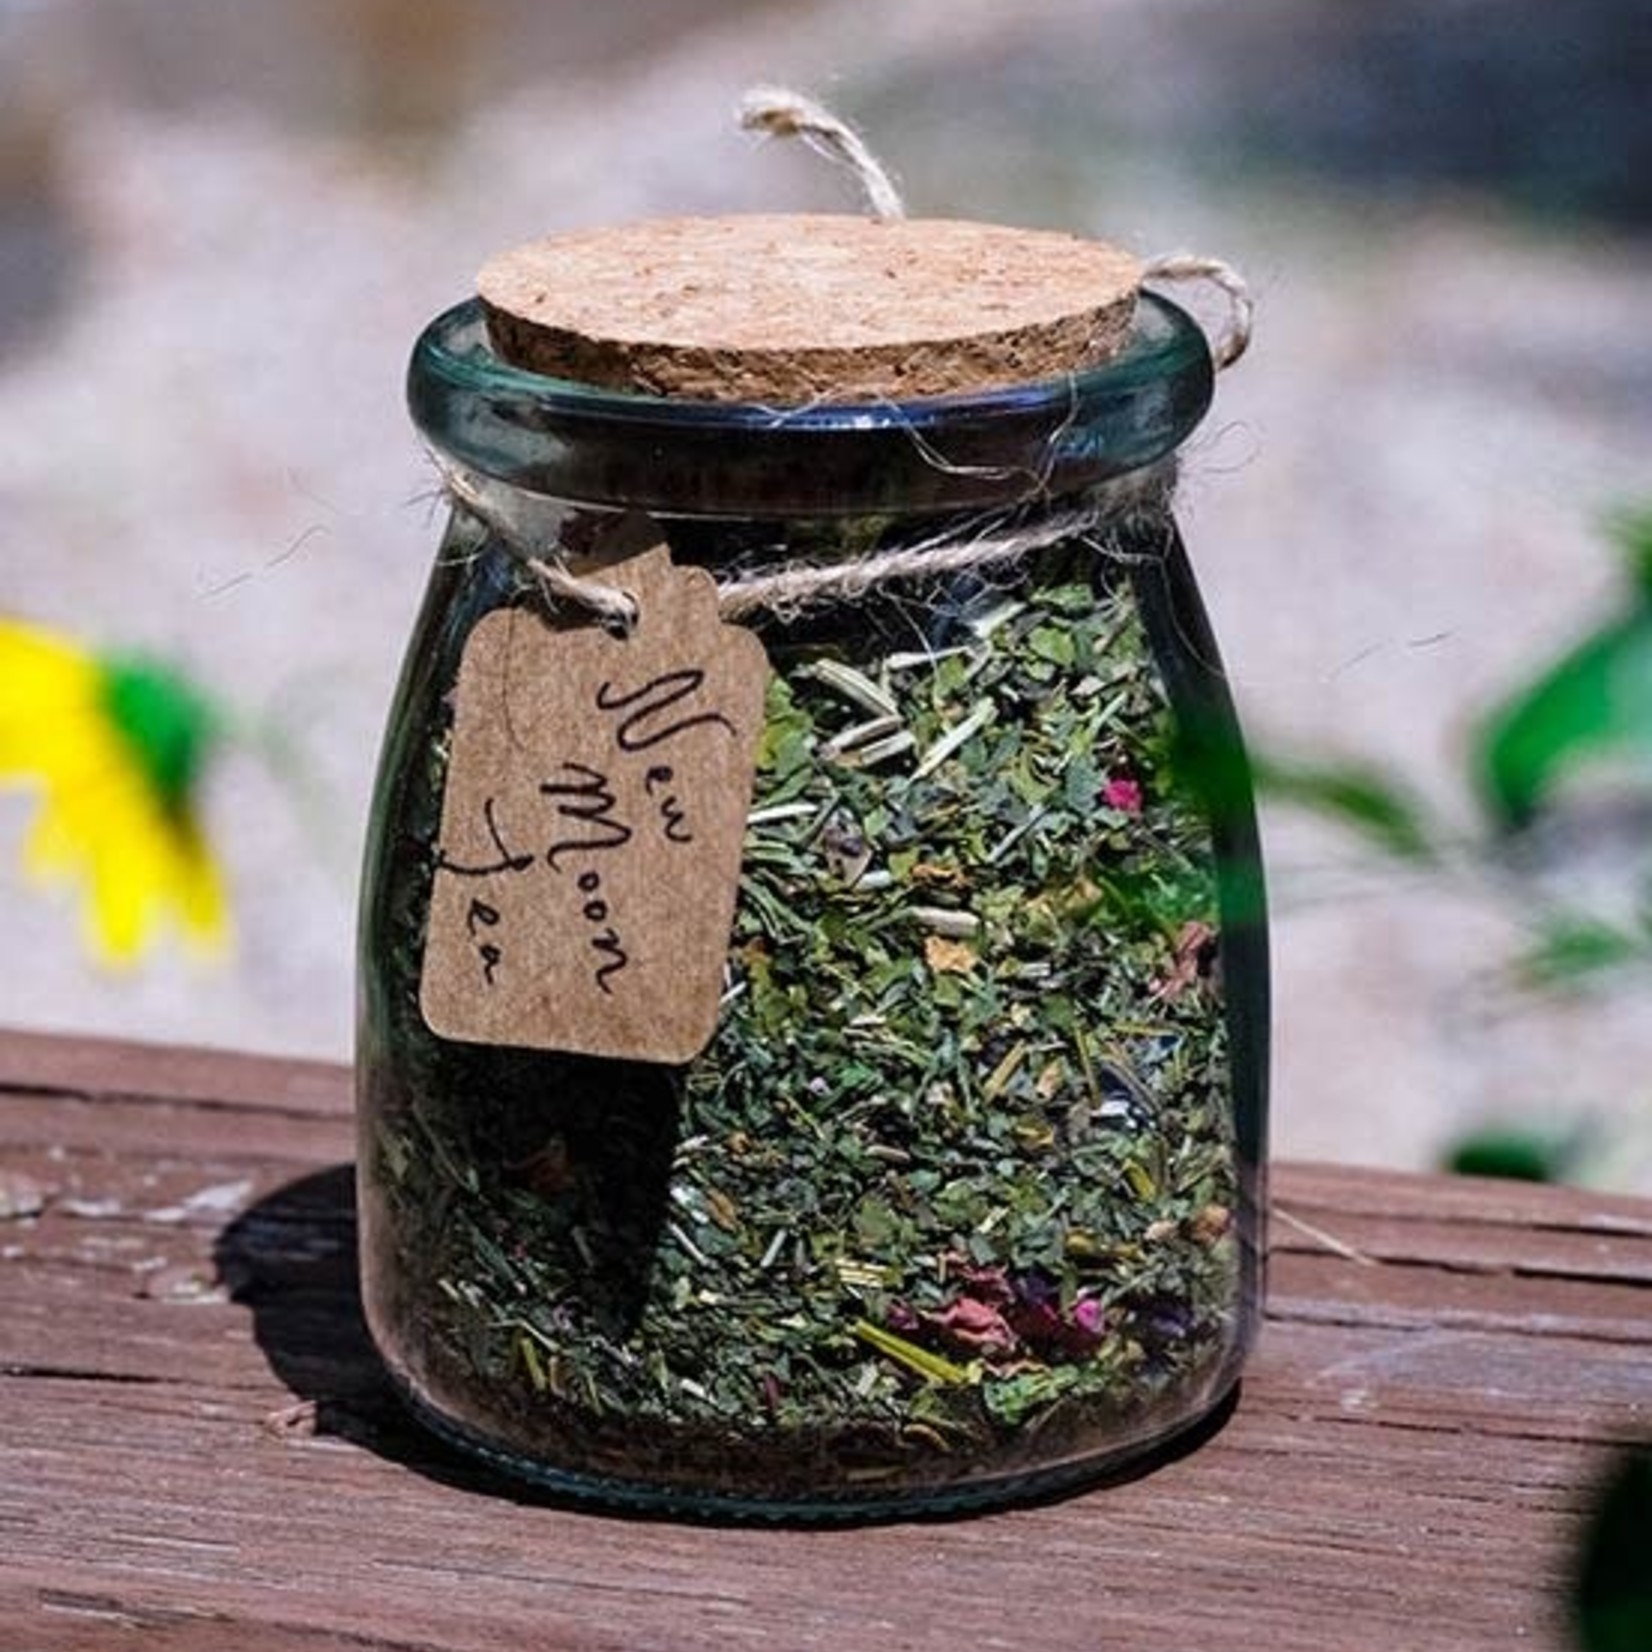 Earth Commons New Moon Tea by Earth Commons